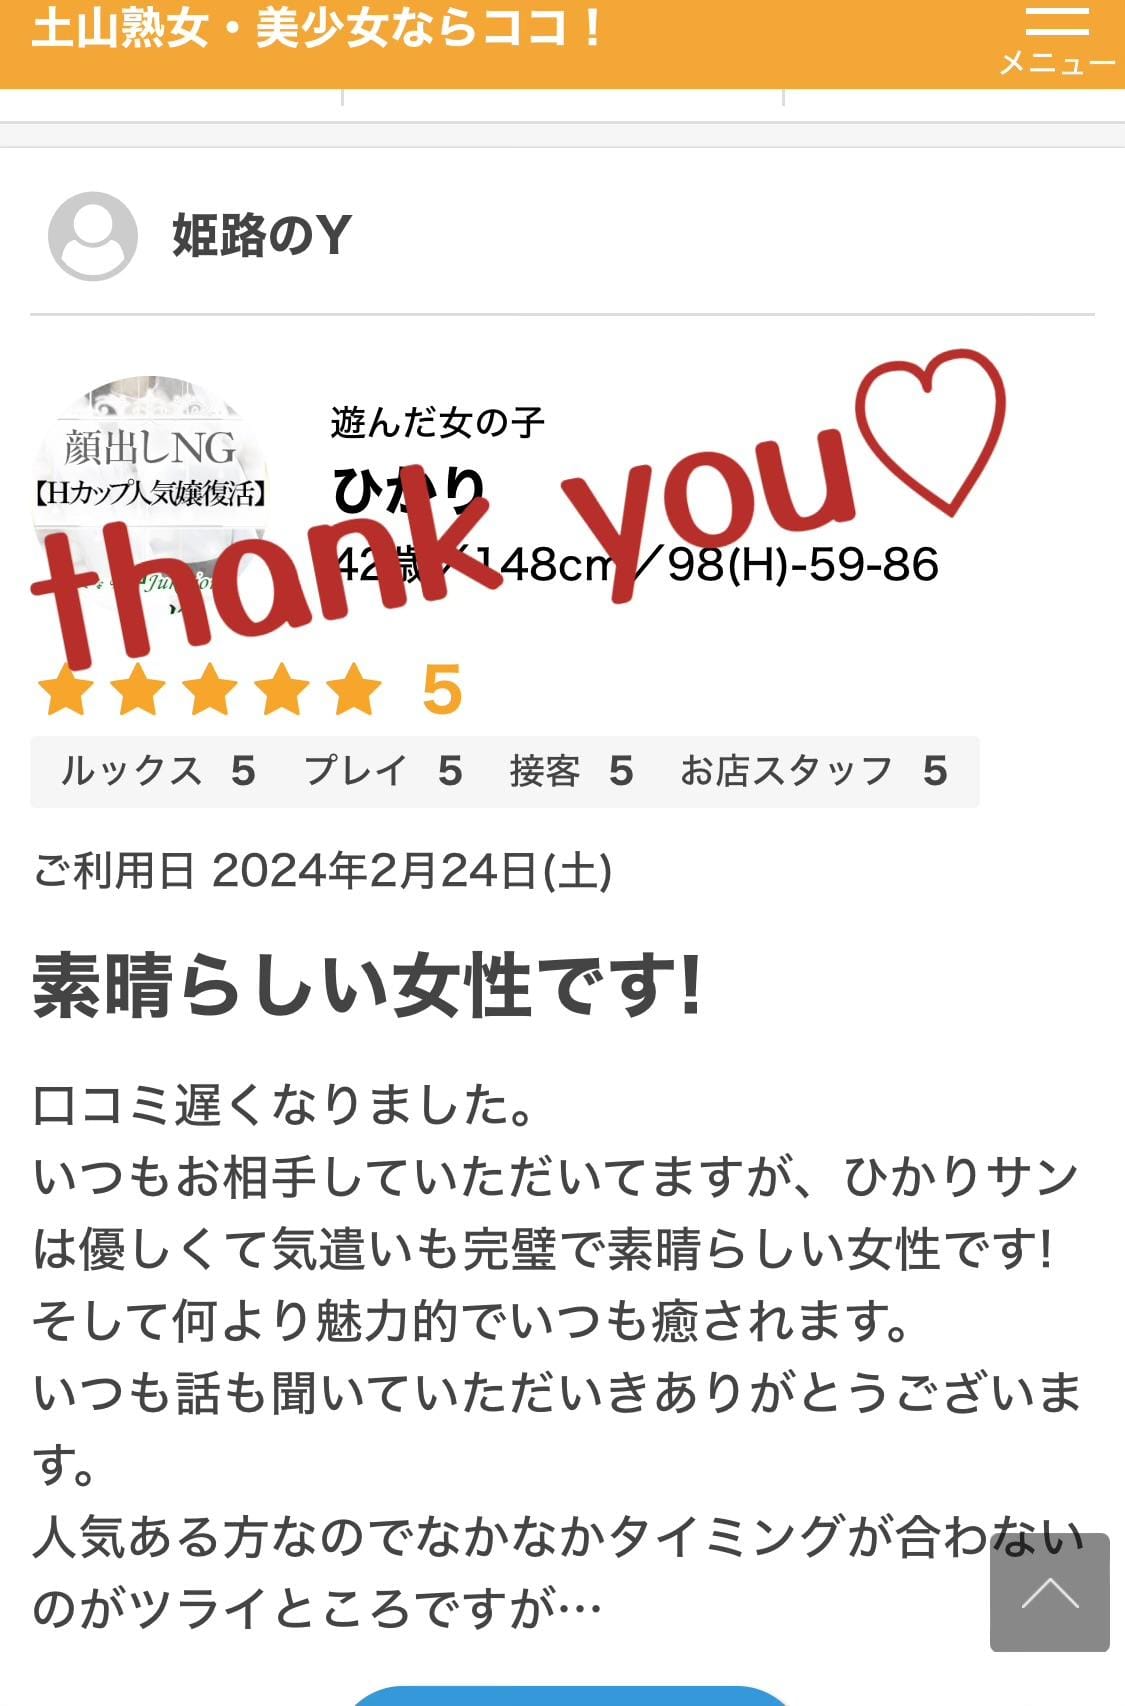 「thank you letter♡////」03/28(木) 09:33 | ひかりの写メ